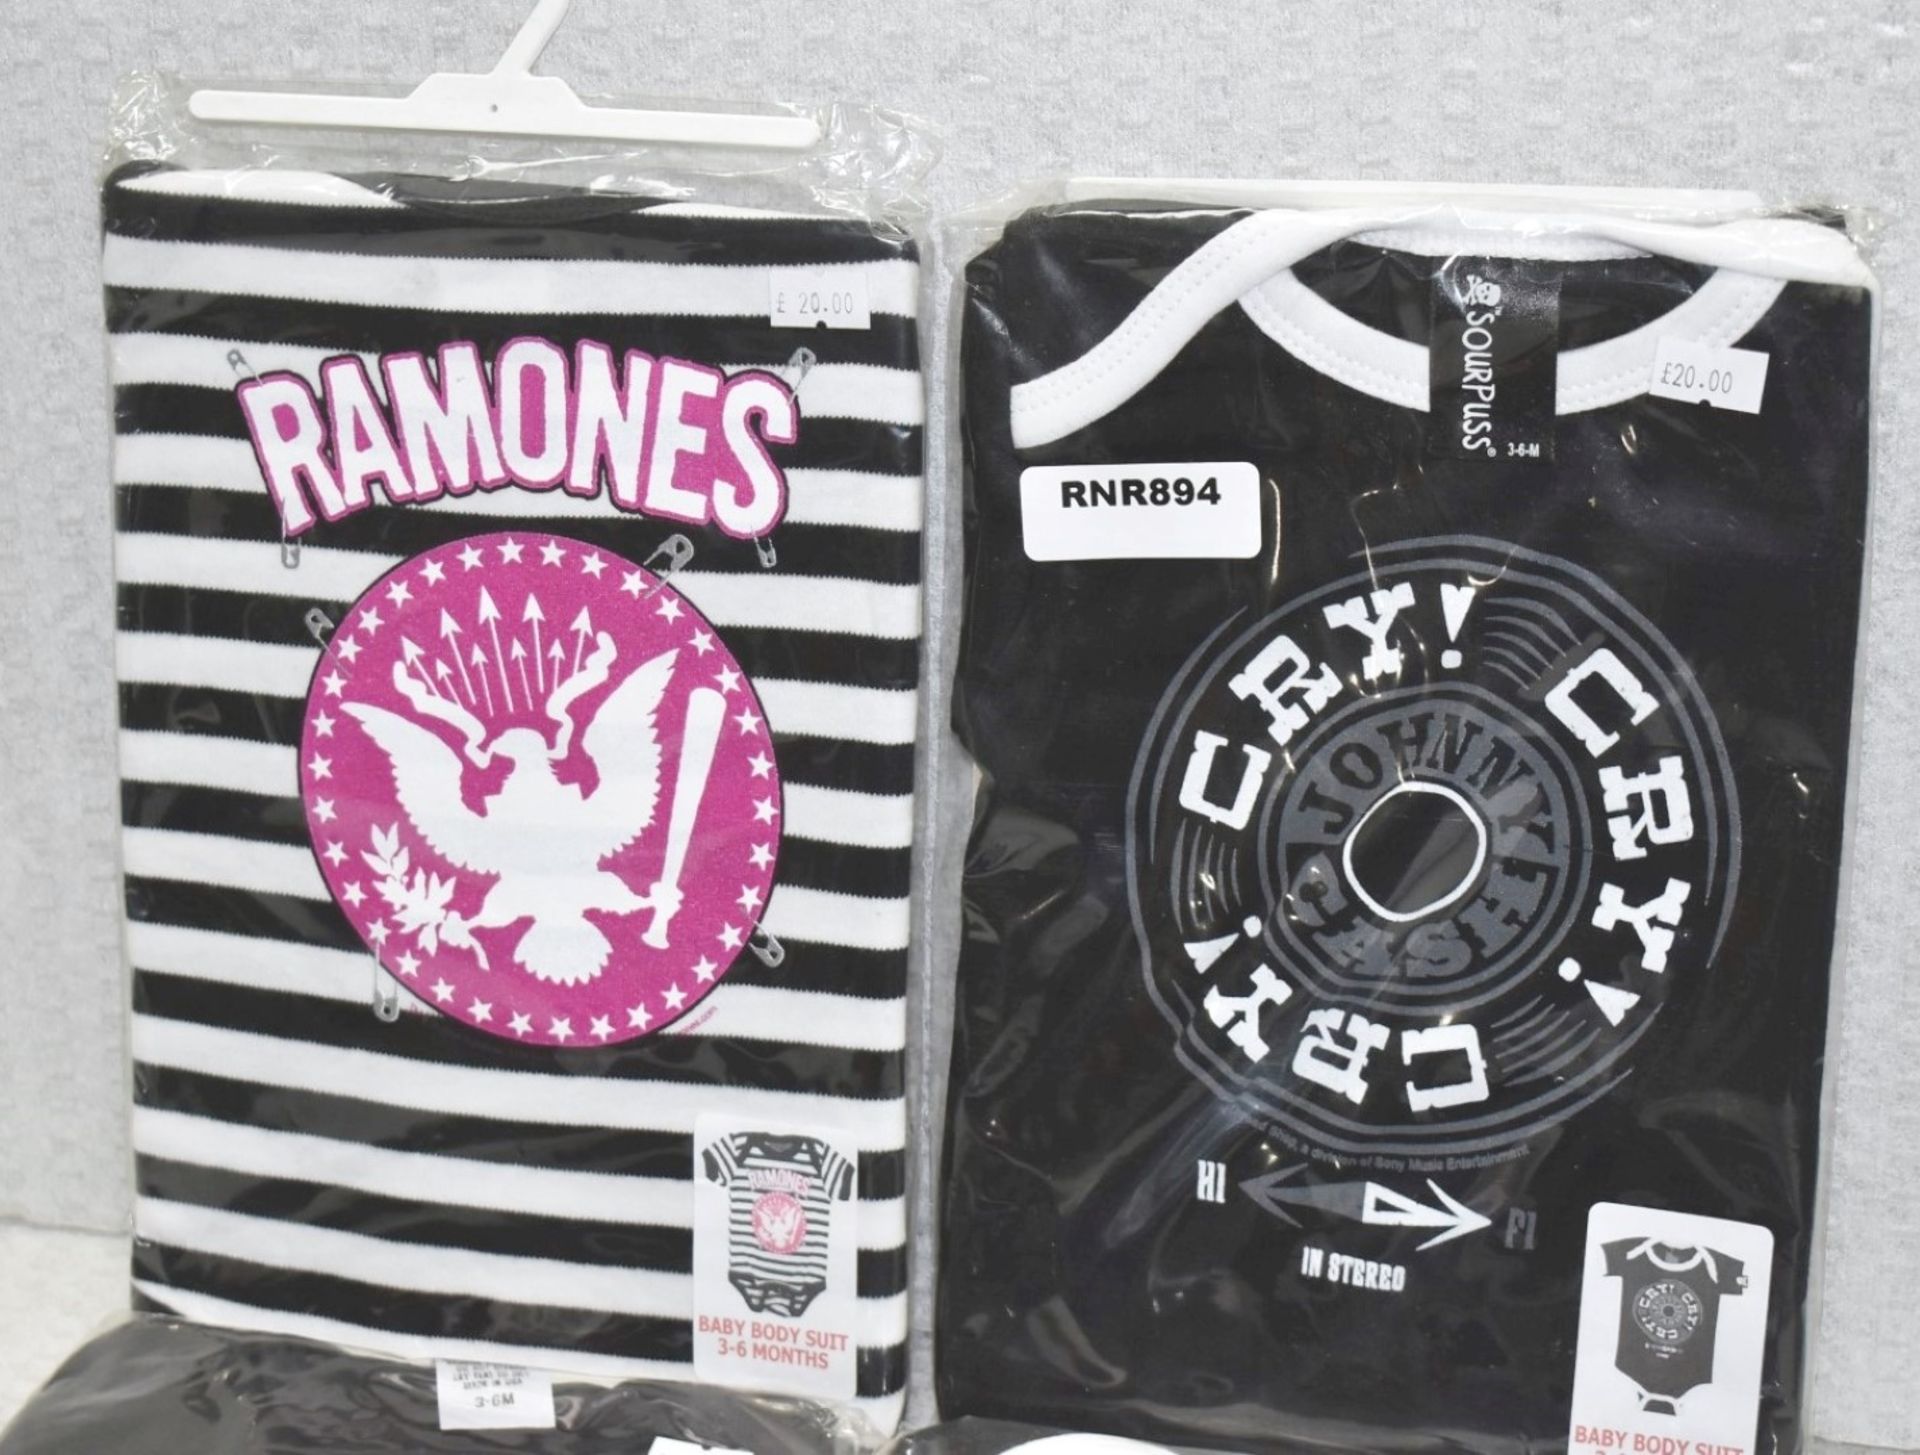 4 x Assorted Baby Body Suits - Features Johnny Cash and the Ramones - Size: 3 to 6 Months - - Image 2 of 8